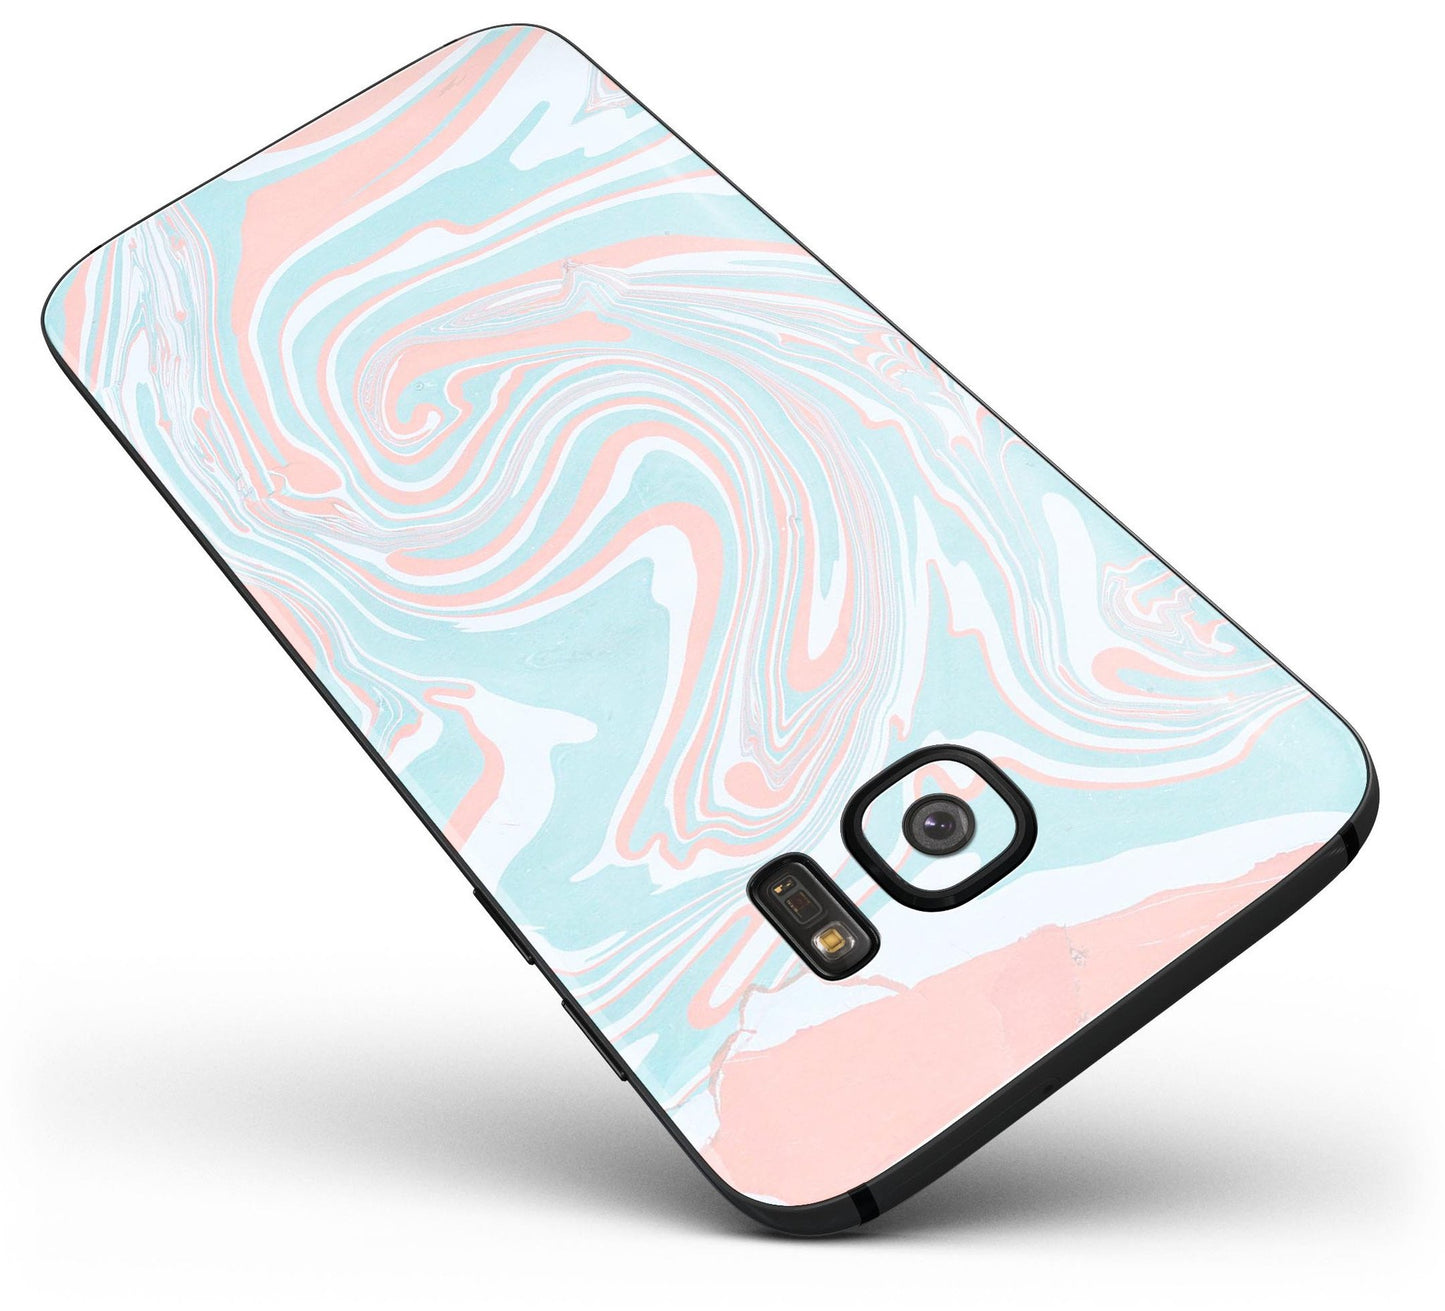 Marbleized Mint and Coral - Full Body Skin-Kit for the Samsung Galaxy